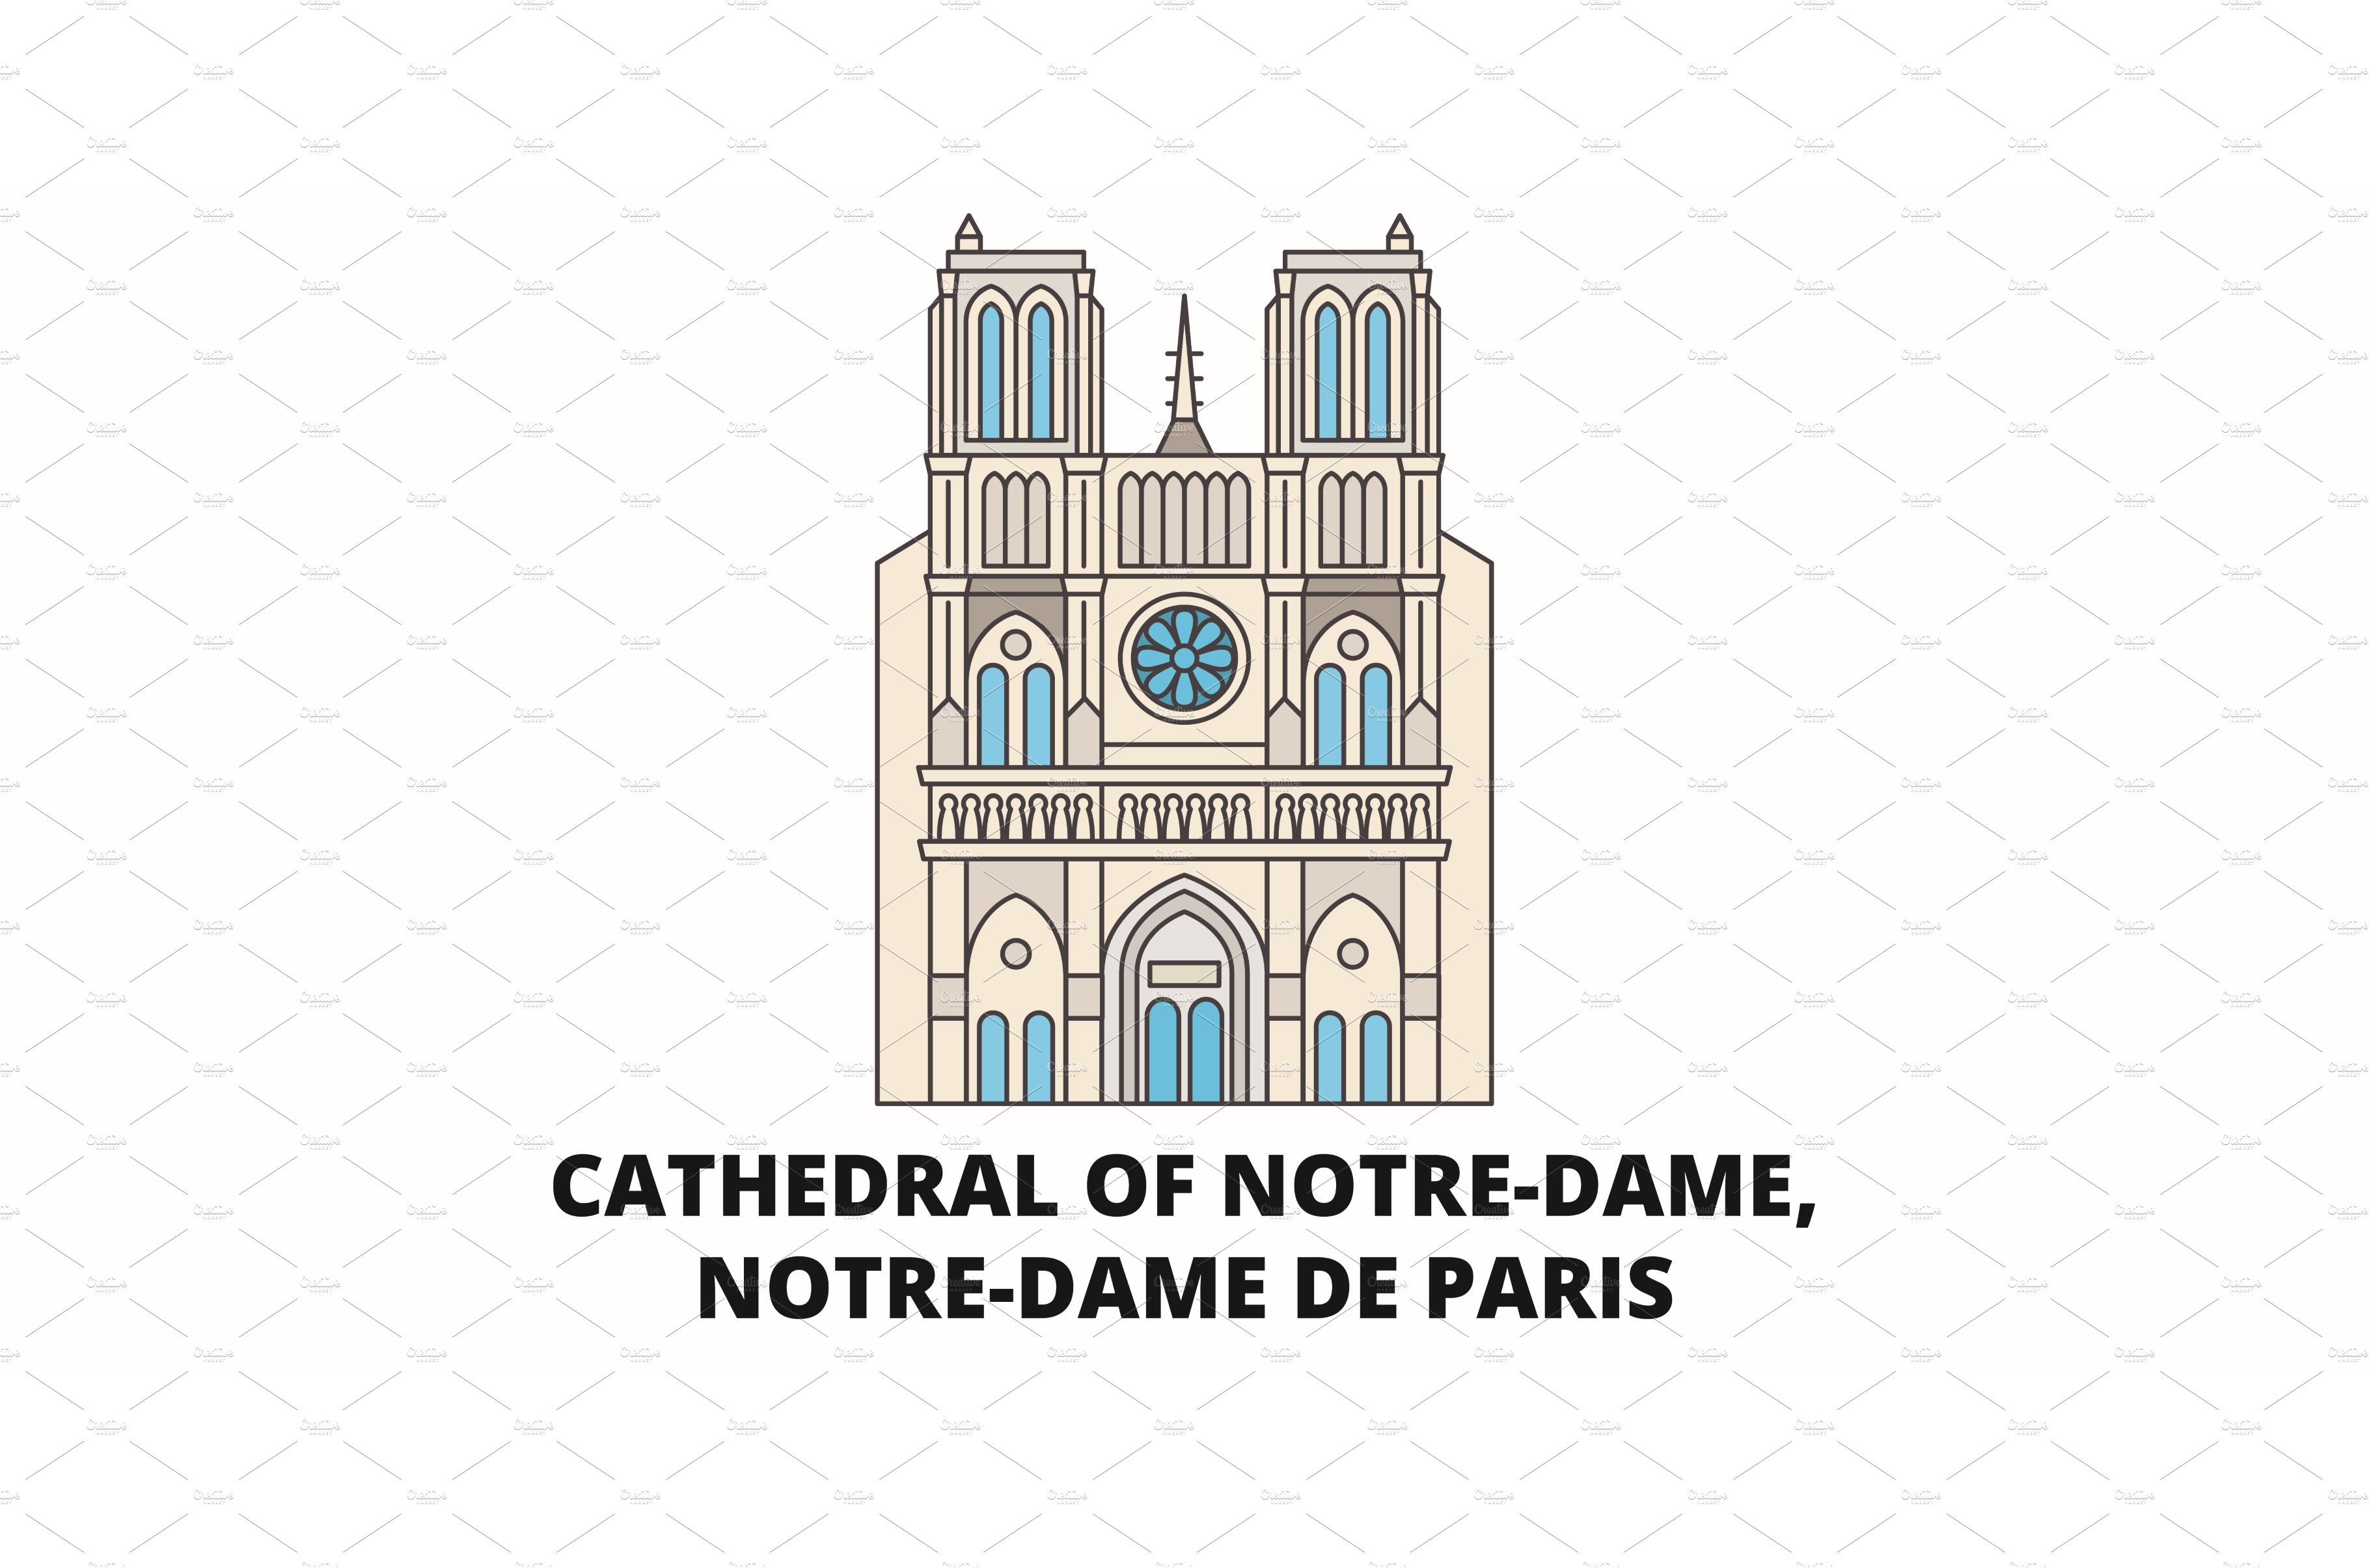 France, Cathedral Of Notre Dame cover image.